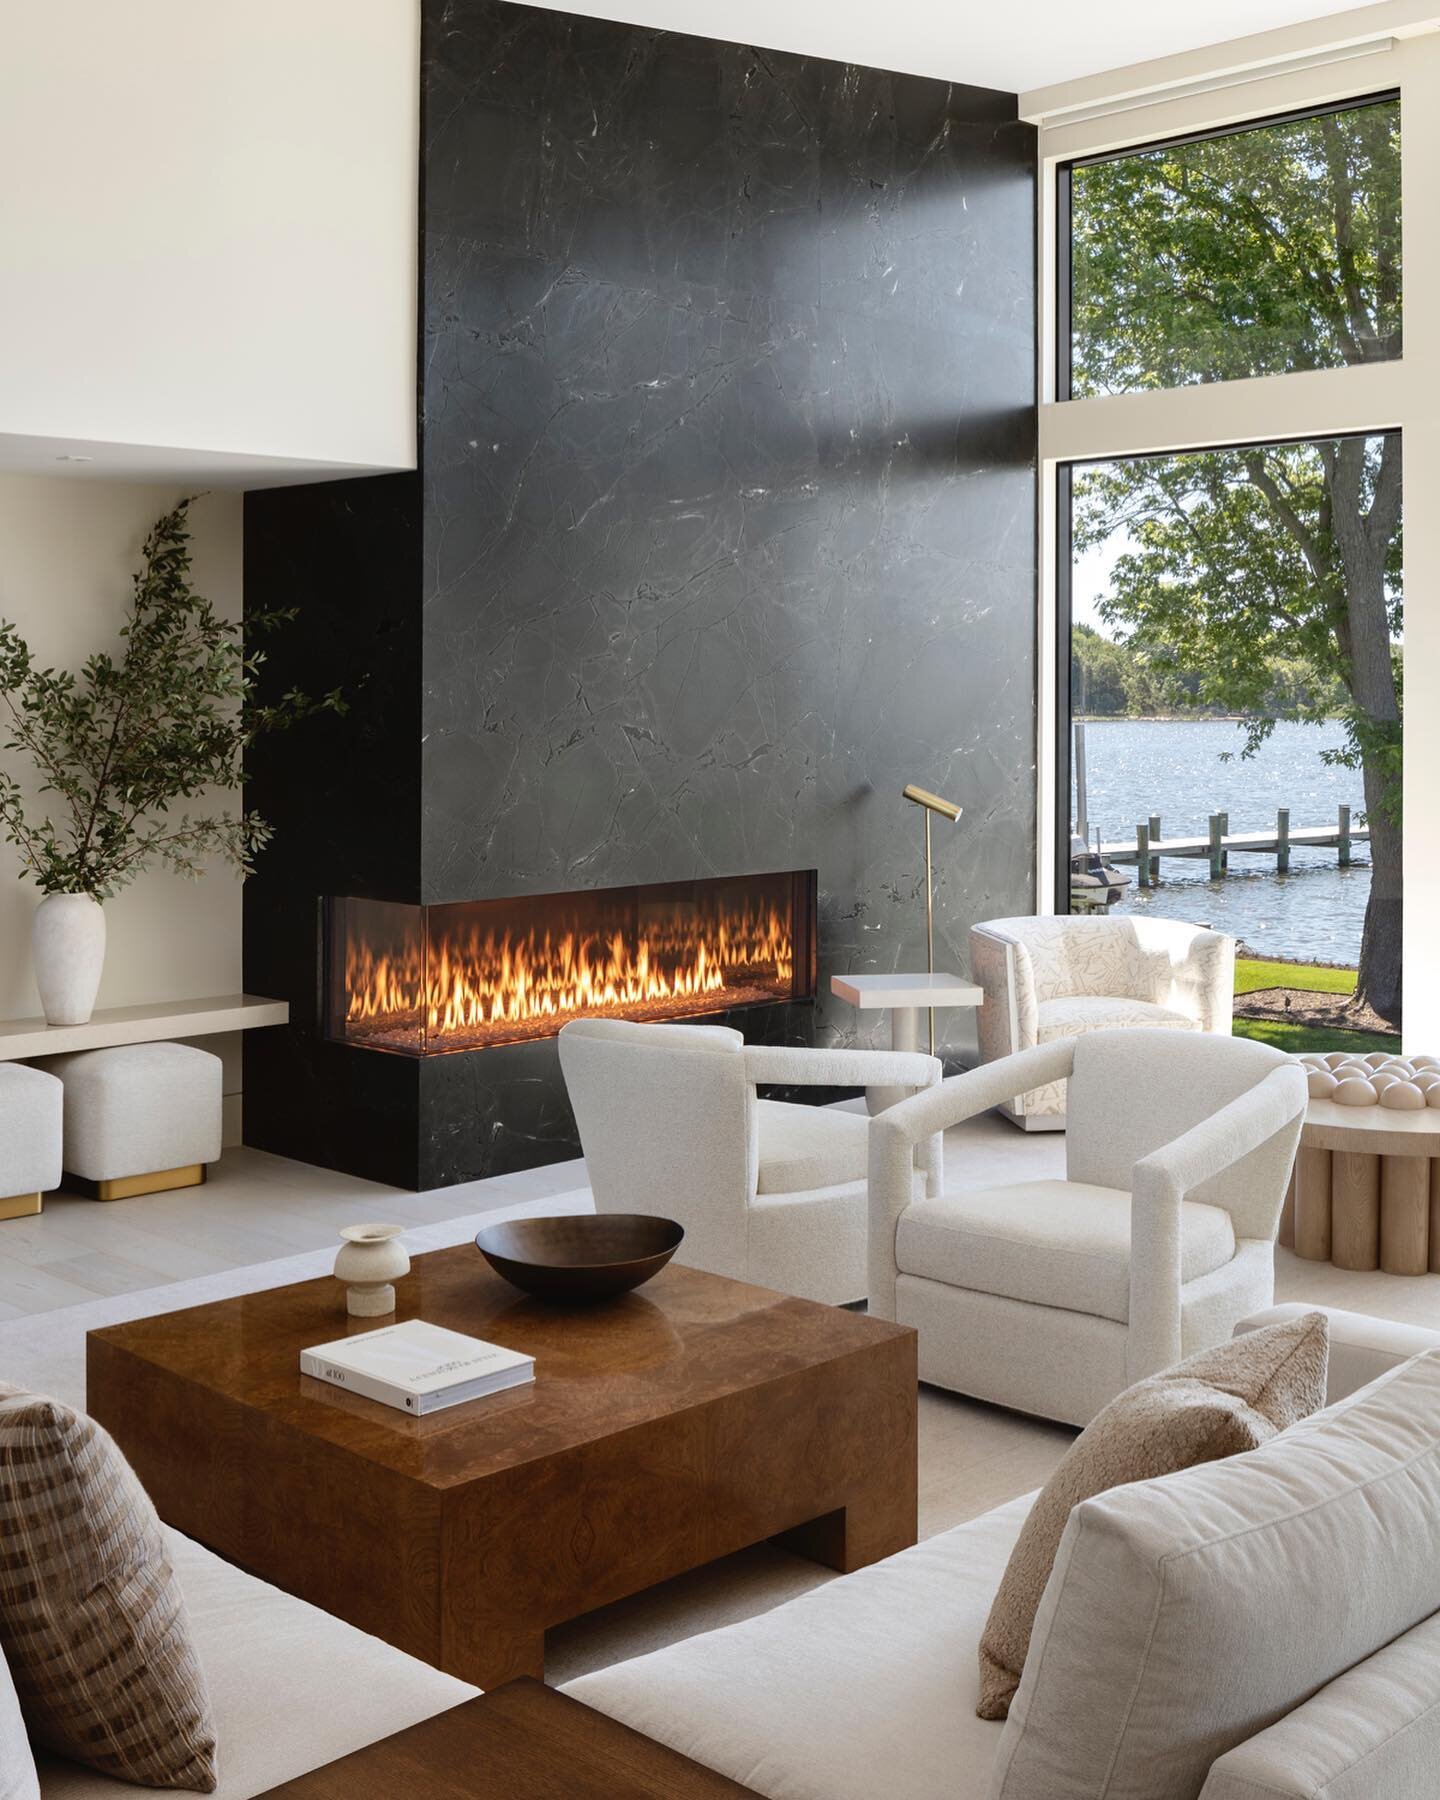 Sit next to a cozy fireplace on this cold fall day. #moderndesign #contemporaryarchitecture